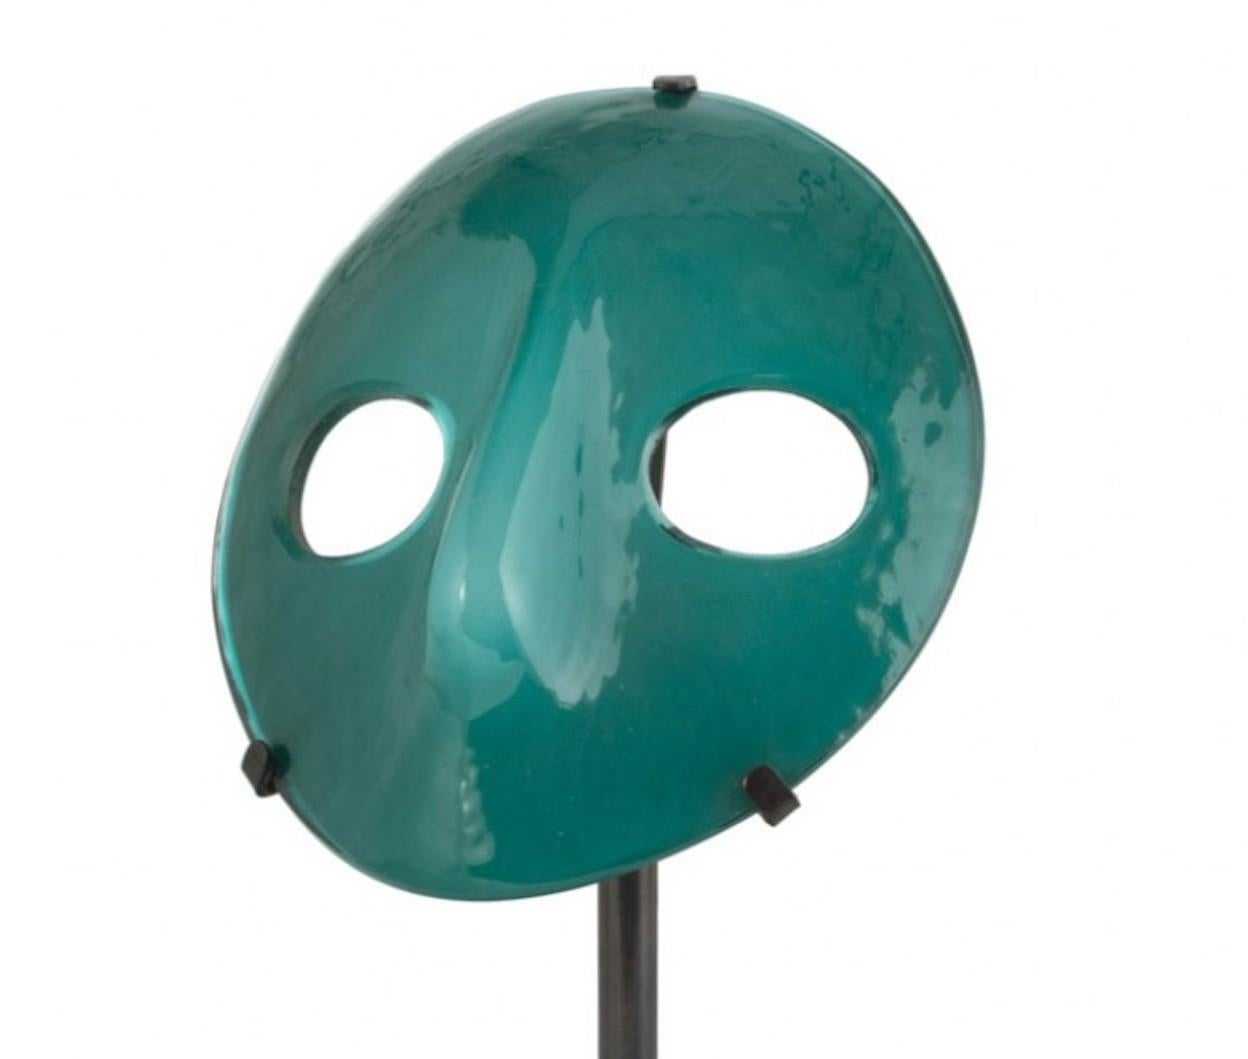 mask made of glass